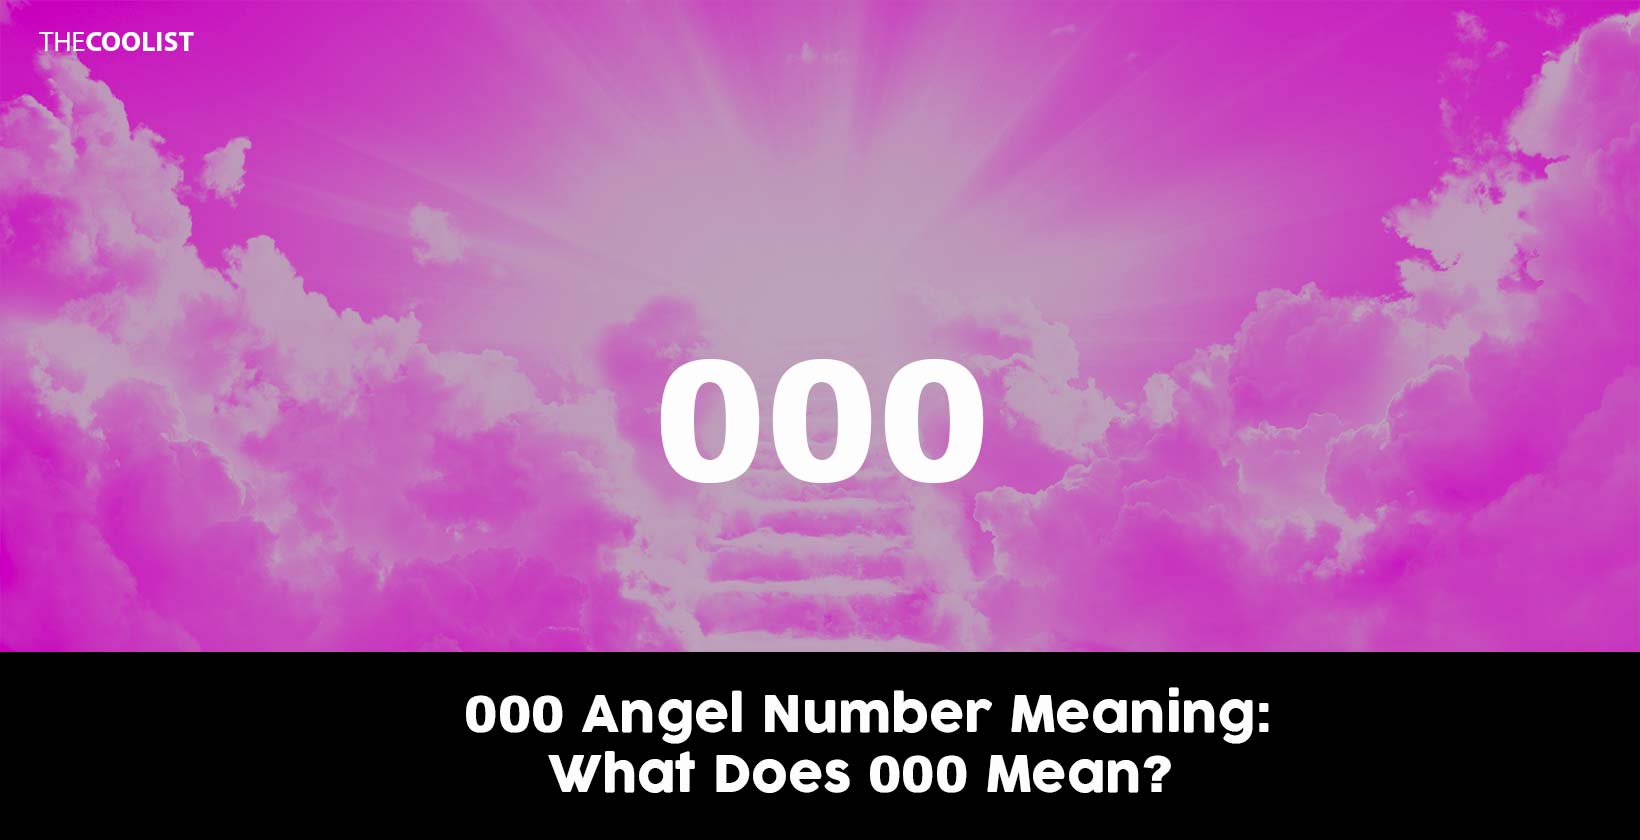 000 Angel Number Meaning: What Does 000 Mean?